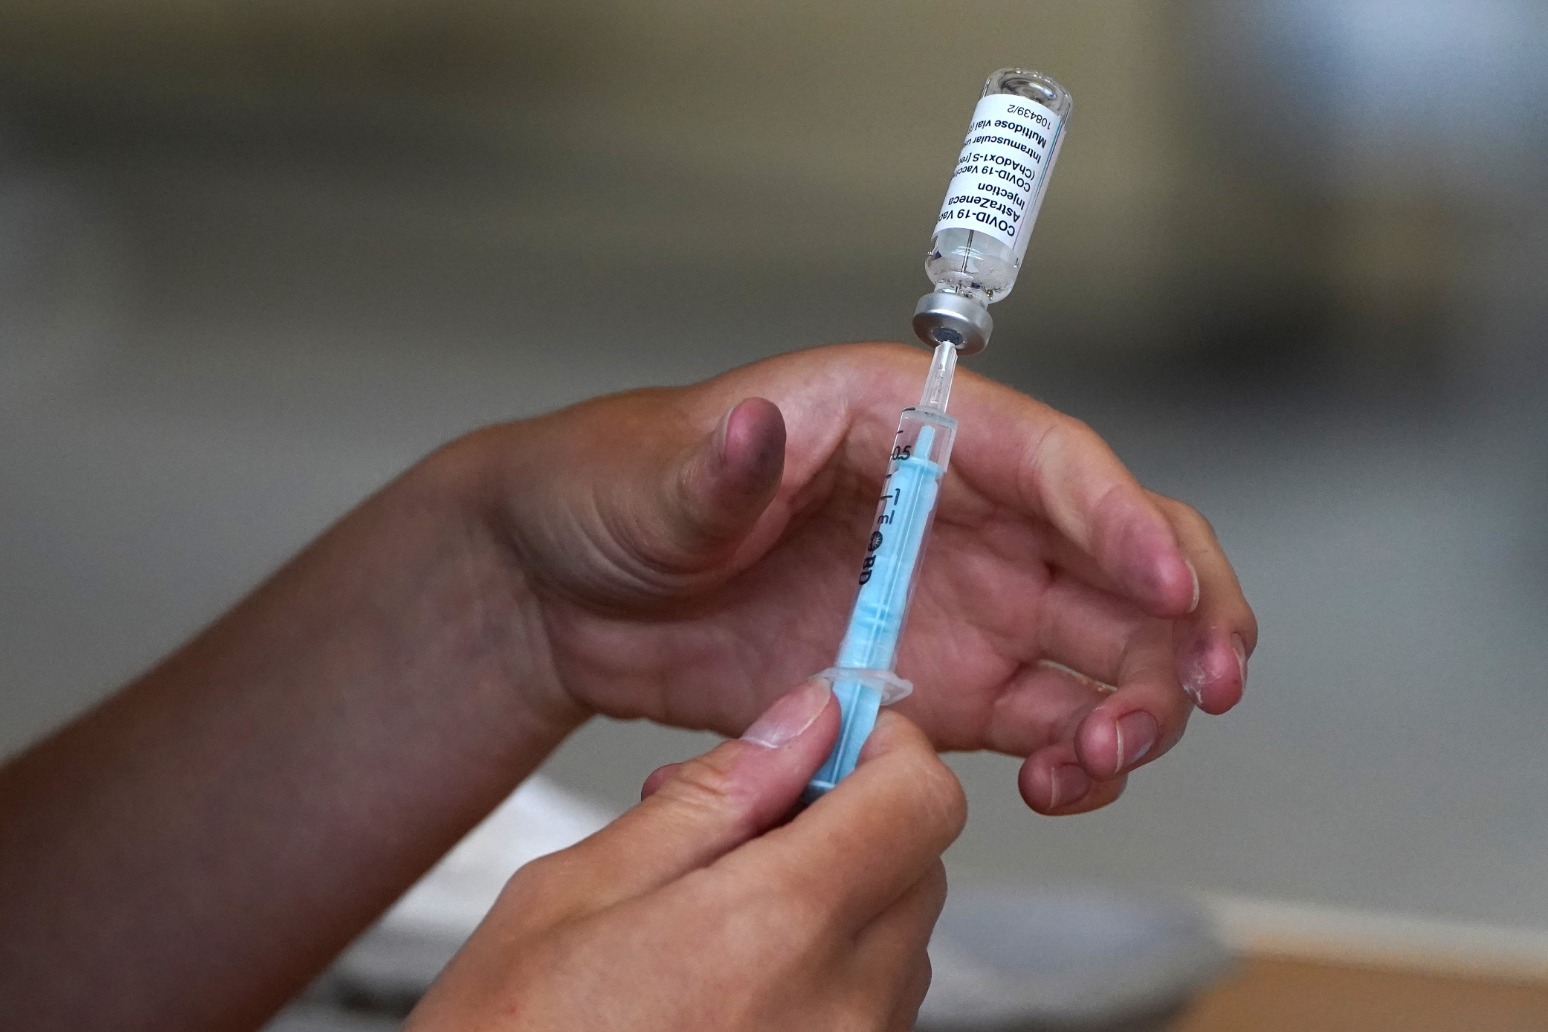 Failure to hit vaccine target for Scots aged 40-49 ‘humiliating’, Labour says 